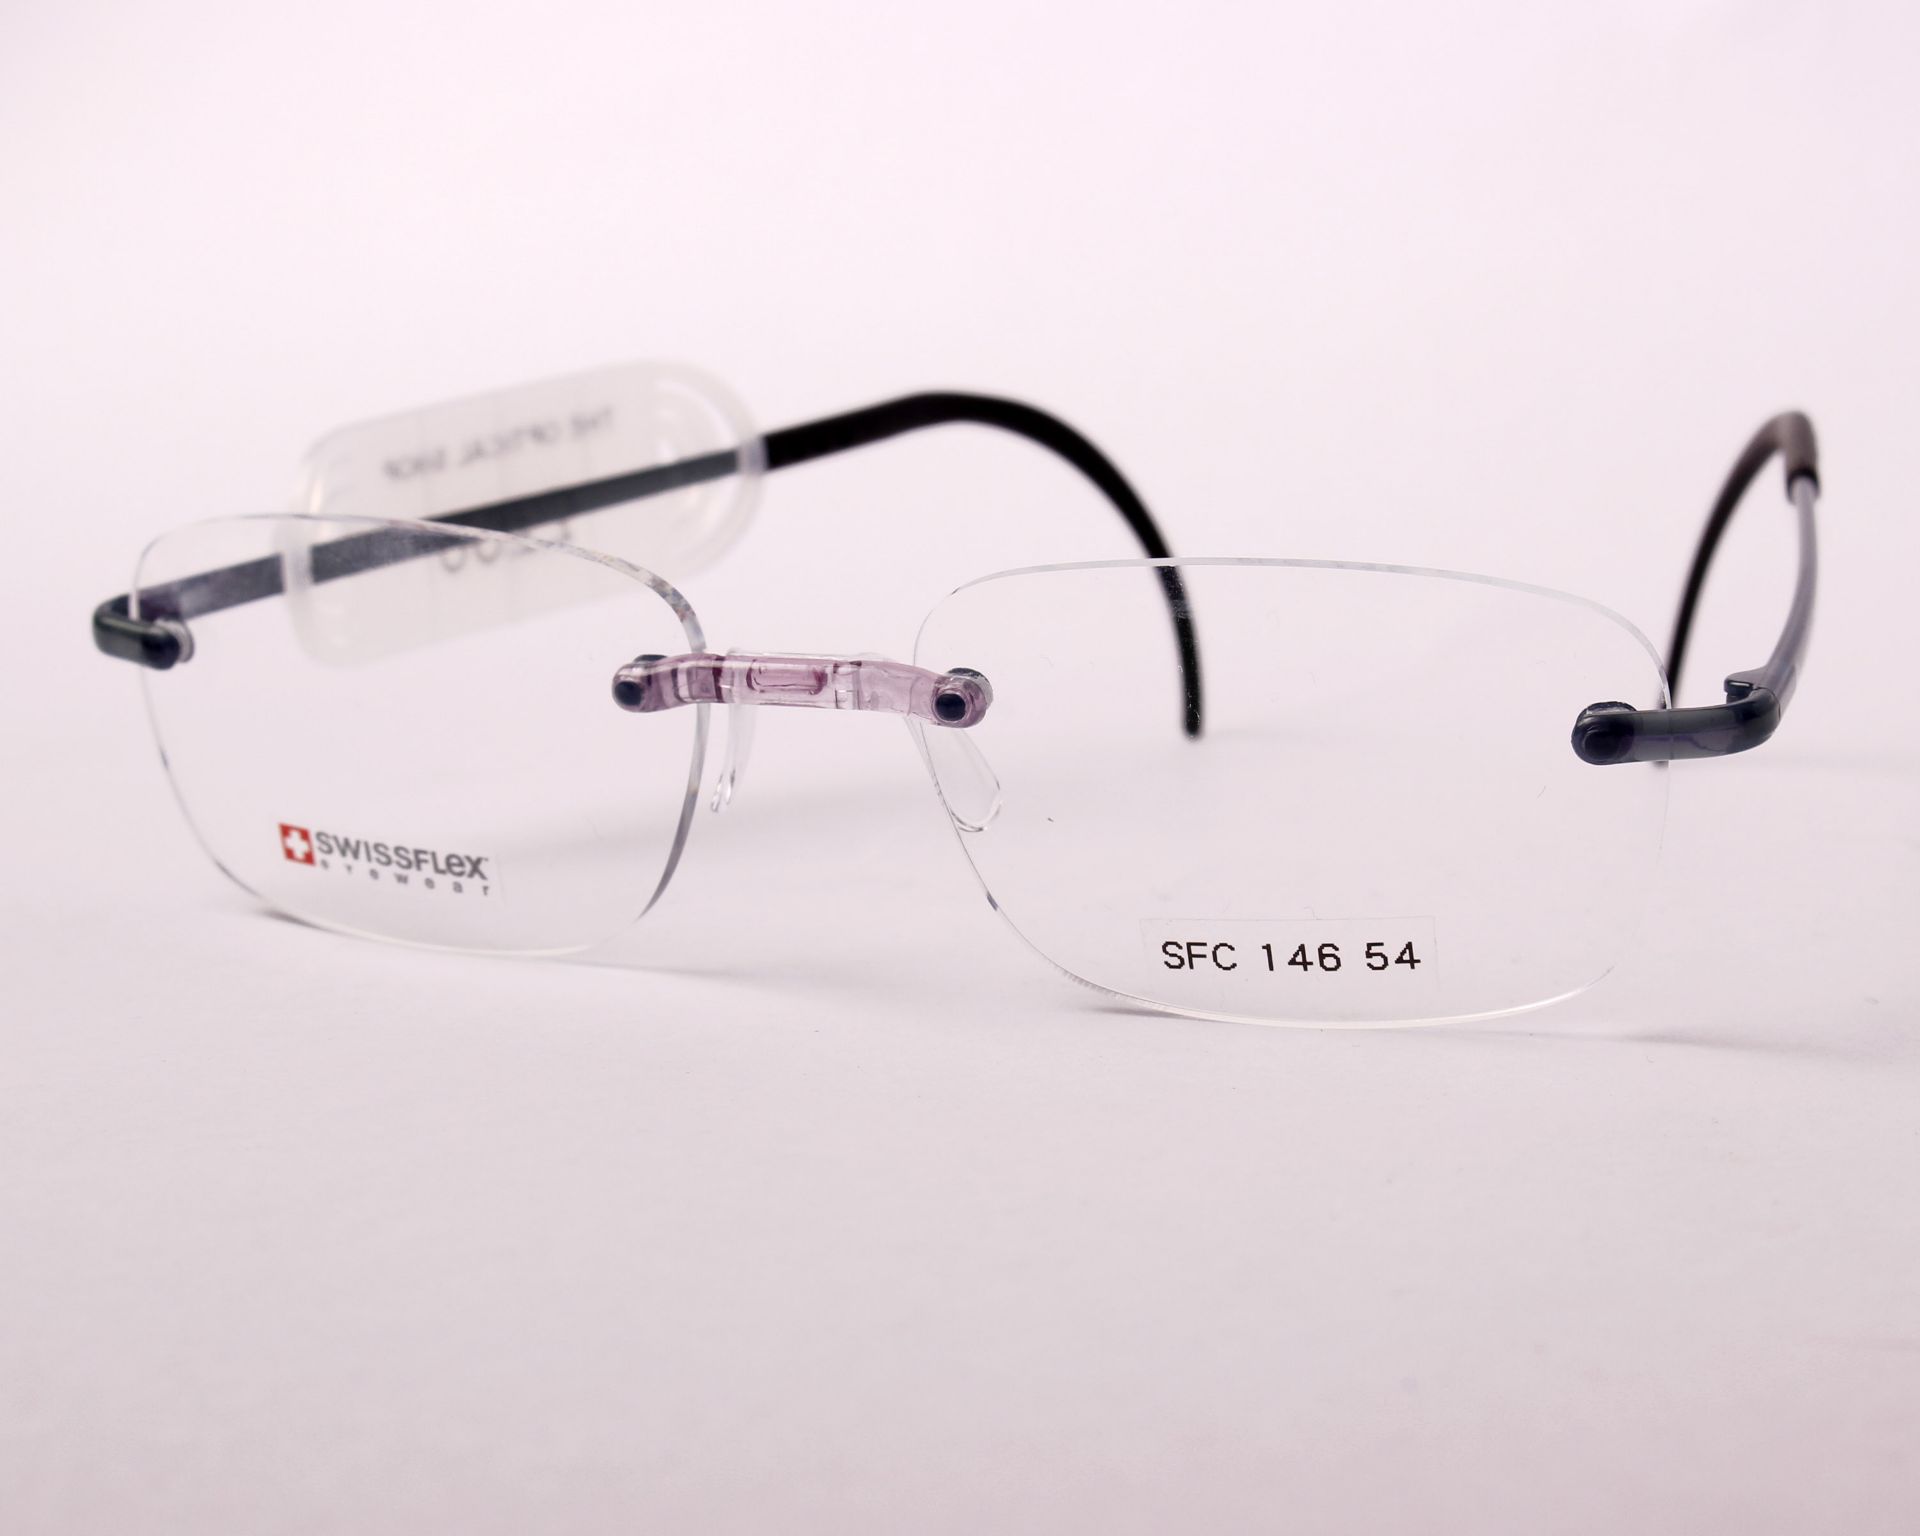 A pair of as new SwissFlex glasses frames with clear glass (RRP £200).